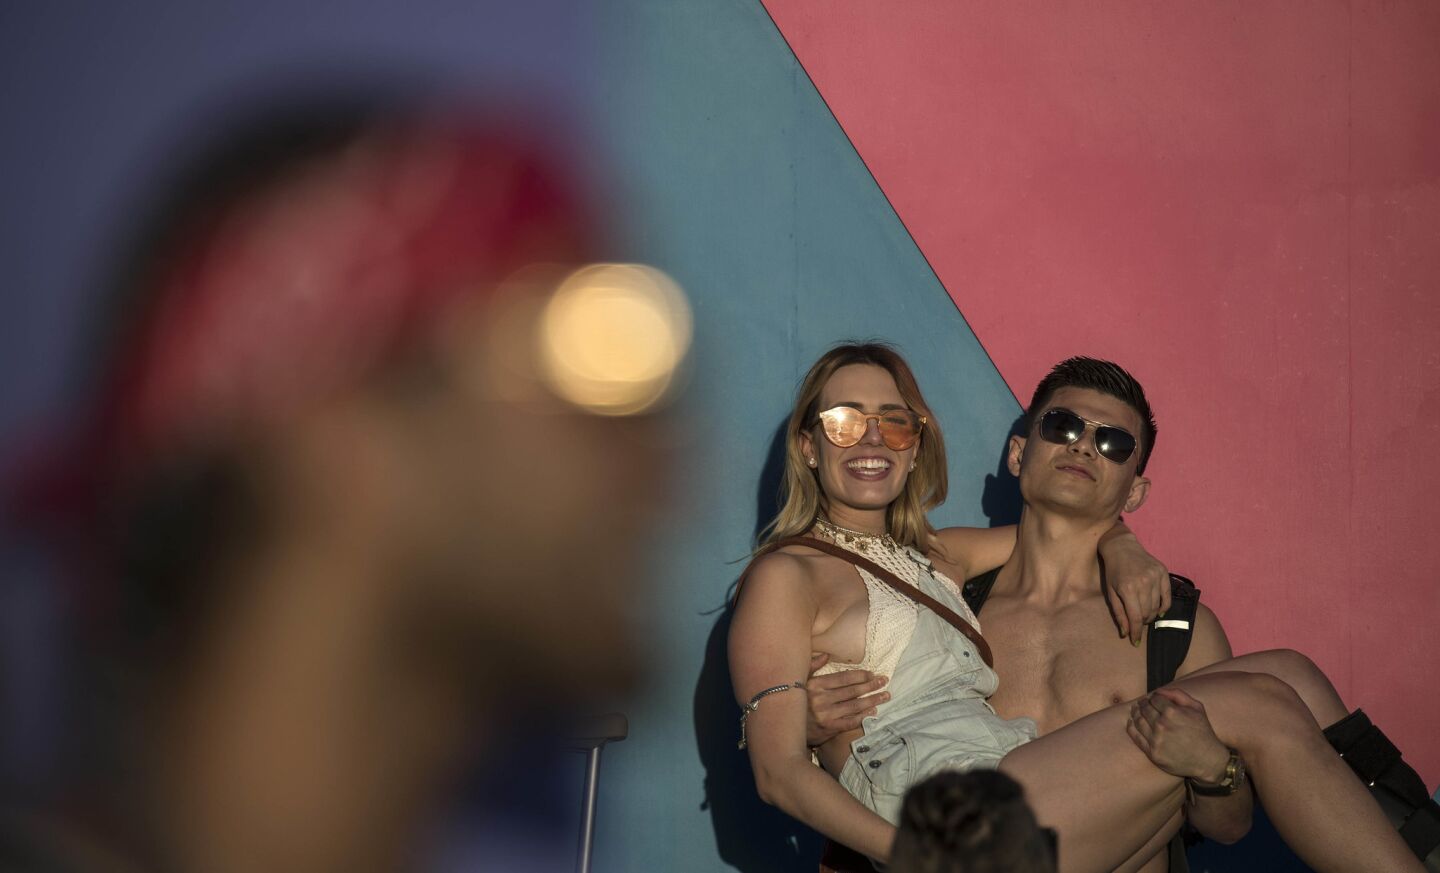 INDIO, CALIF. -- FRIDAY, APRIL 14, 2017: Coachell goers pose for photos against 'this is what brings things into focus?' installation as the sun goes down on day one at the Coachella Music and Arts Festival in Indio, Calif., on April 14, 2017. (Brian van der Brug / Los Angeles Times)